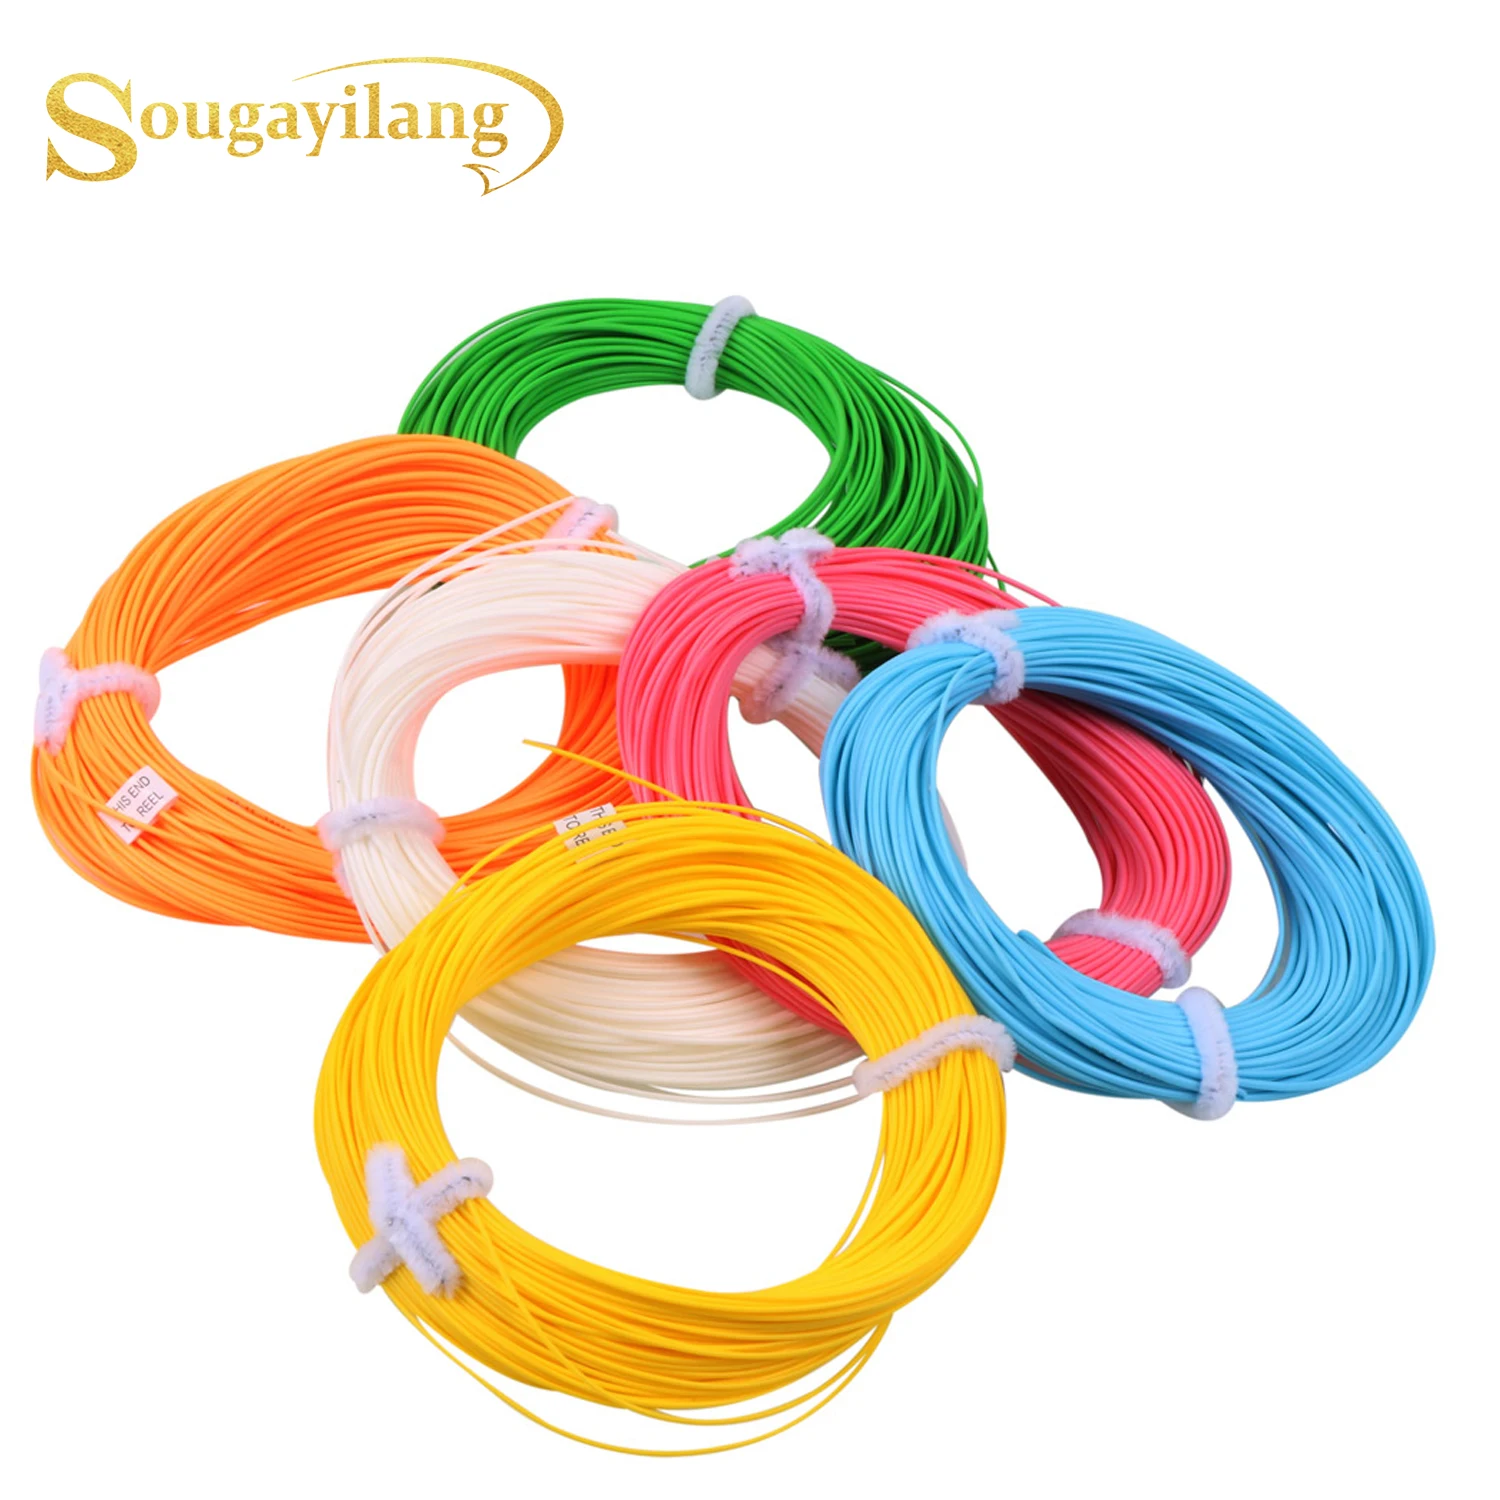 Sougayilang 6 Color Fly Fishing Line Forward Floating 4F/5F/6/7F/8F 100FT Length Maximum Catch  Fly Fishing Line Multi Filamento